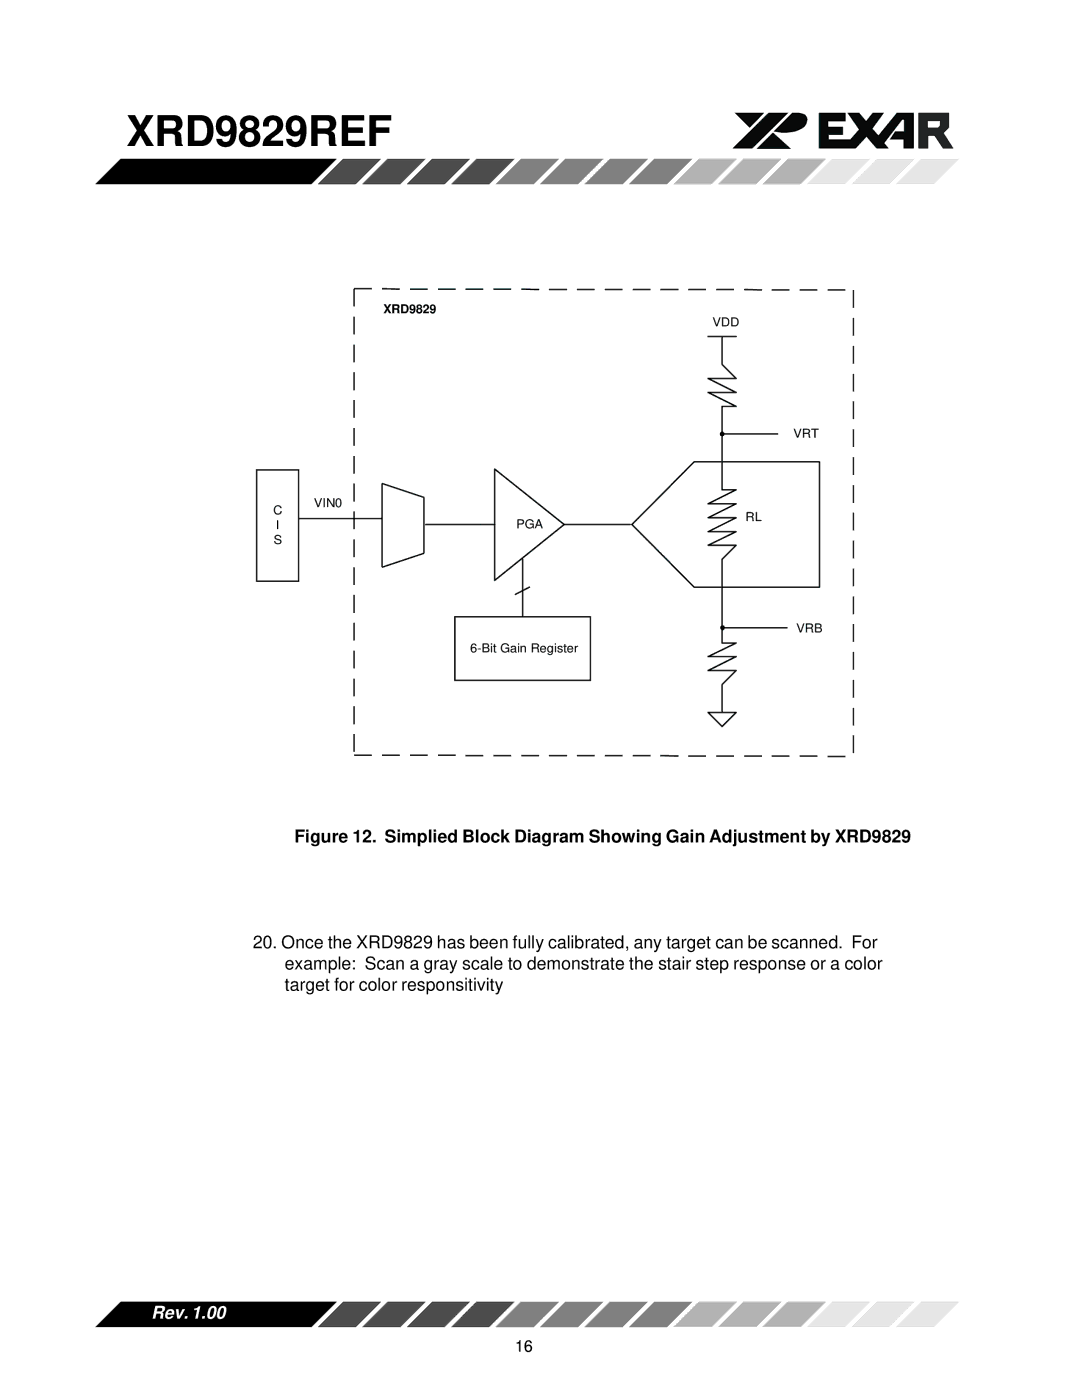 Canon XRD9829REF user manual Simplied Block Diagram Showing Gain Adjustment by XRD9829 